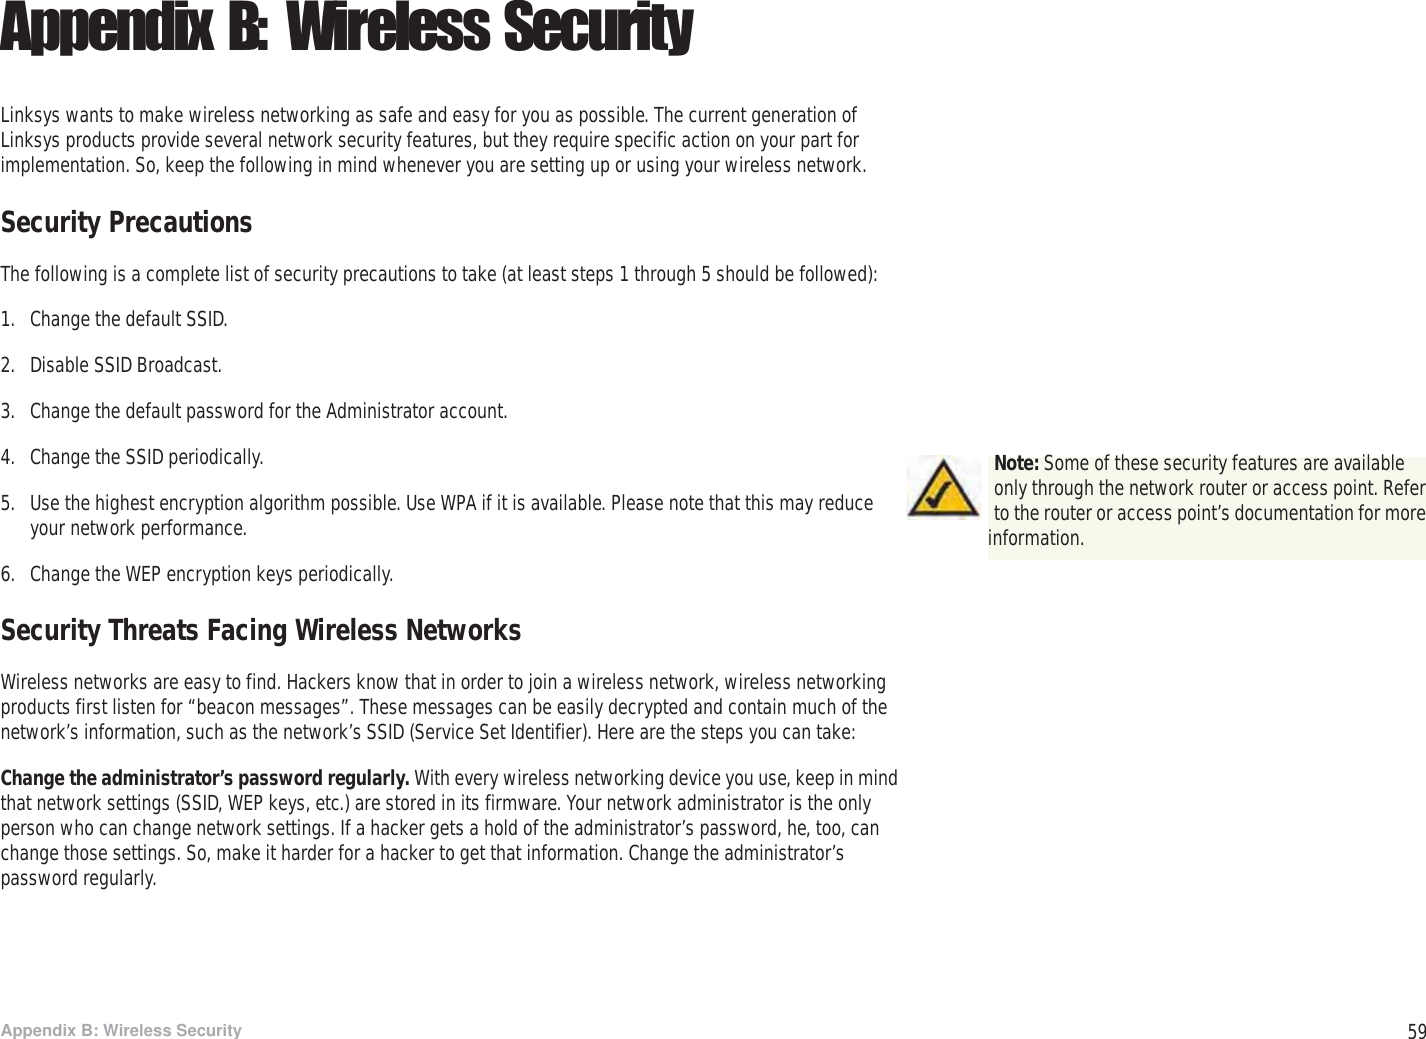 59Appendix B: Wireless SecuritySecurity PrecautionsWireless-G PTZ Internet Camera with AudioAppendix B: Wireless SecurityLinksys wants to make wireless networking as safe and easy for you as possible. The current generation of Linksys products provide several network security features, but they require specific action on your part for implementation. So, keep the following in mind whenever you are setting up or using your wireless network.Security PrecautionsThe following is a complete list of security precautions to take (at least steps 1 through 5 should be followed):1. Change the default SSID. 2. Disable SSID Broadcast. 3. Change the default password for the Administrator account. 4. Change the SSID periodically. 5. Use the highest encryption algorithm possible. Use WPA if it is available. Please note that this may reduce your network performance. 6. Change the WEP encryption keys periodically. Security Threats Facing Wireless Networks Wireless networks are easy to find. Hackers know that in order to join a wireless network, wireless networking products first listen for “beacon messages”. These messages can be easily decrypted and contain much of the network’s information, such as the network’s SSID (Service Set Identifier). Here are the steps you can take:Change the administrator’s password regularly. With every wireless networking device you use, keep in mind that network settings (SSID, WEP keys, etc.) are stored in its firmware. Your network administrator is the only person who can change network settings. If a hacker gets a hold of the administrator’s password, he, too, can change those settings. So, make it harder for a hacker to get that information. Change the administrator’s password regularly.Note: Some of these security features are available only through the network router or access point. Refer to the router or access point’s documentation for more information.